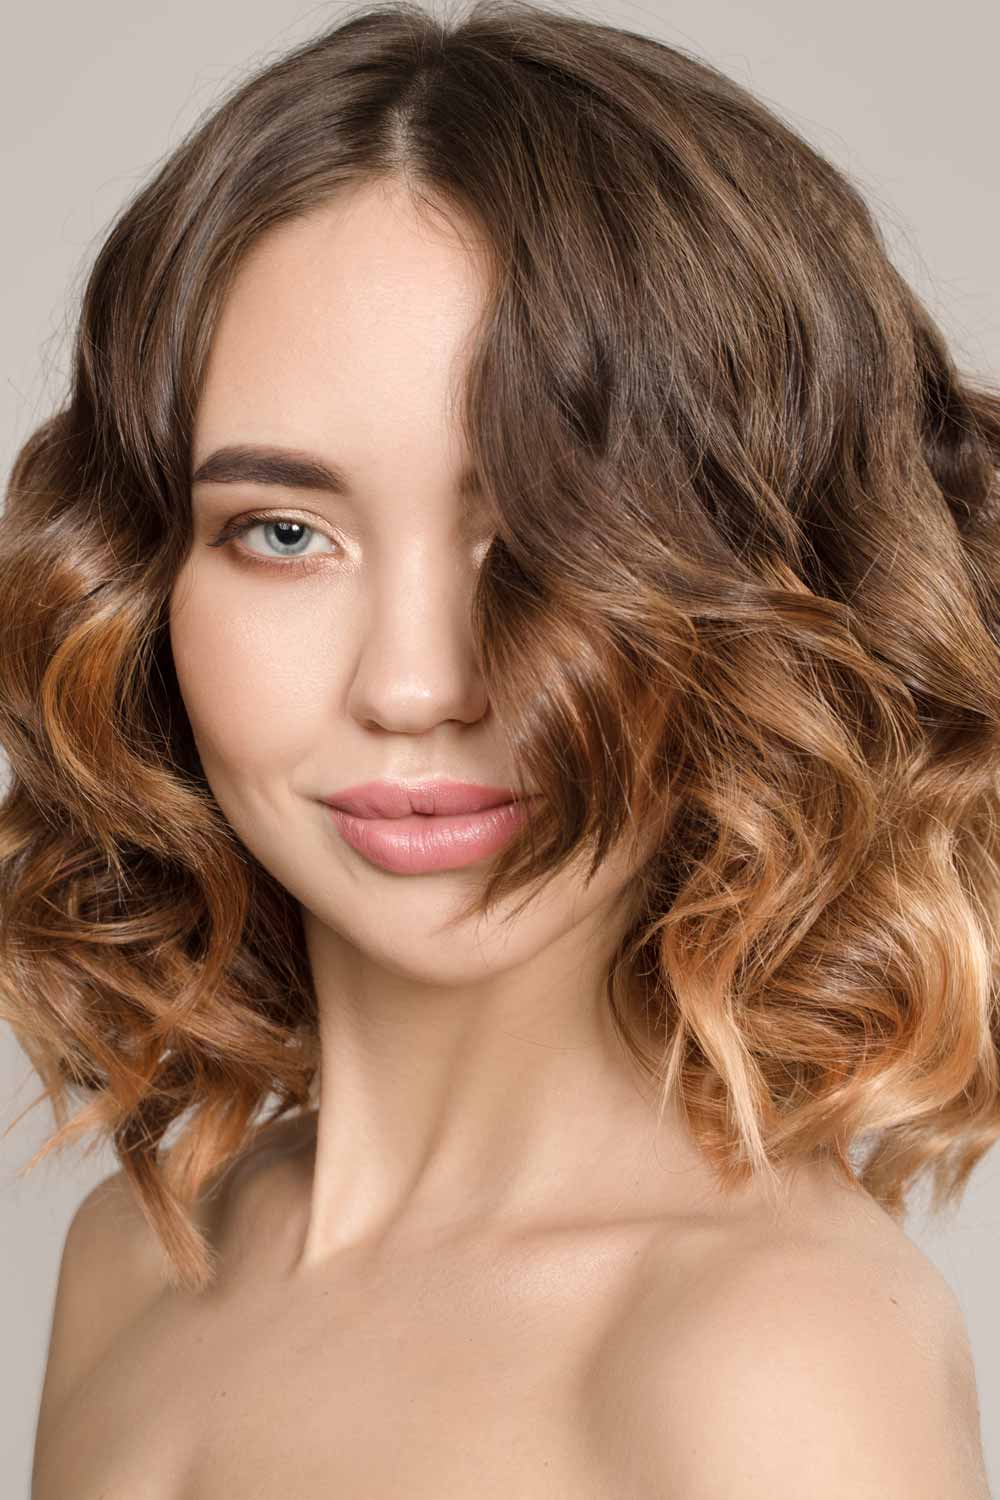 In the ombre technique, there is a distinct and noticeable transition from a darker color at the roots to a lighter color towards the ends